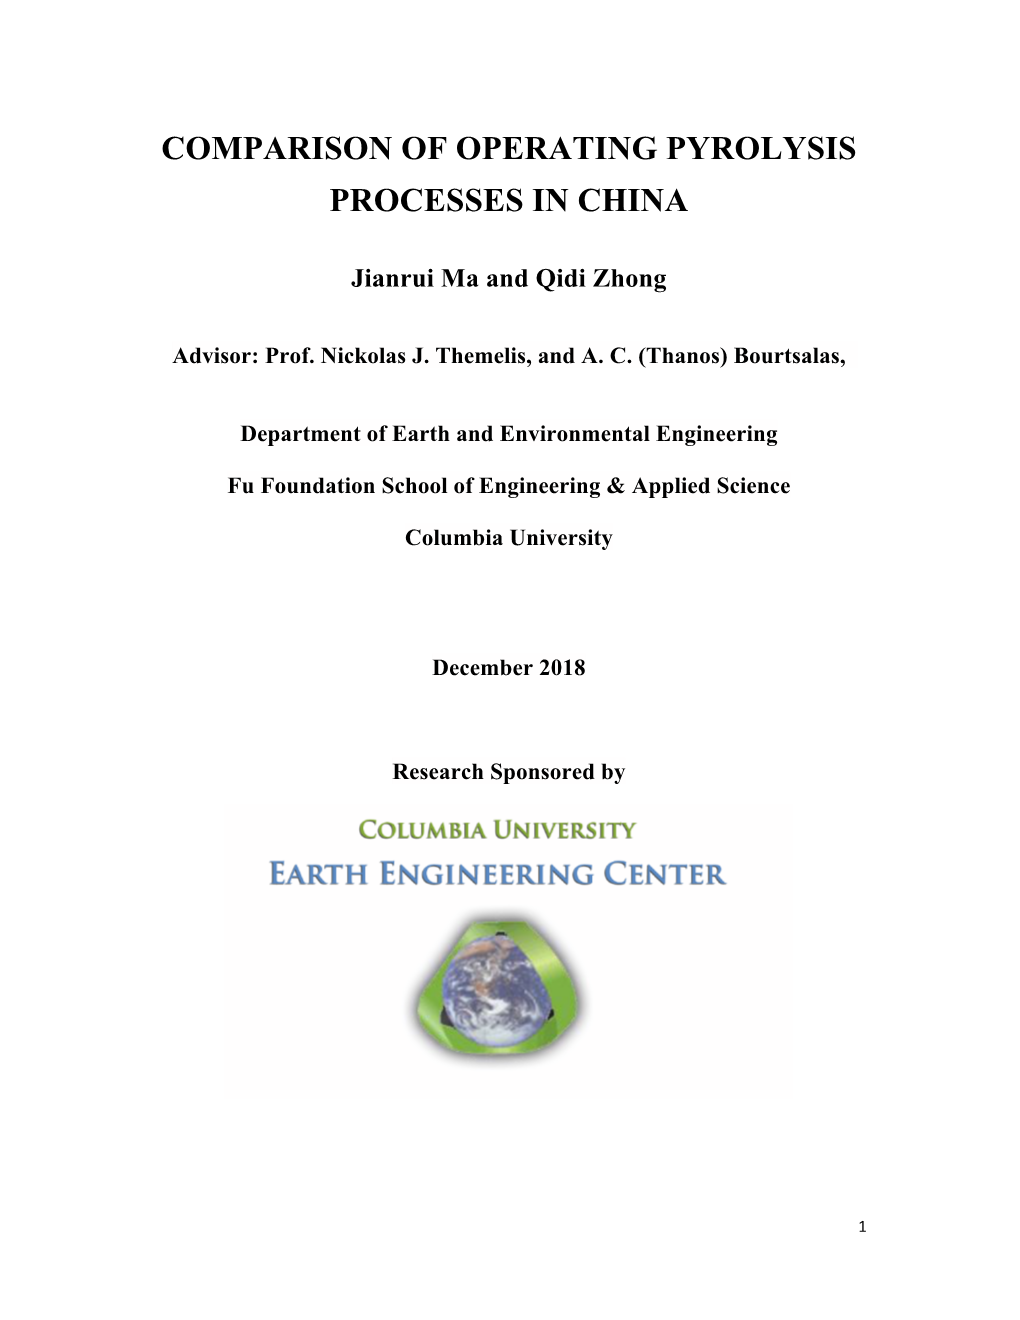 Comparison of Operating Pyrolysis Processes in China